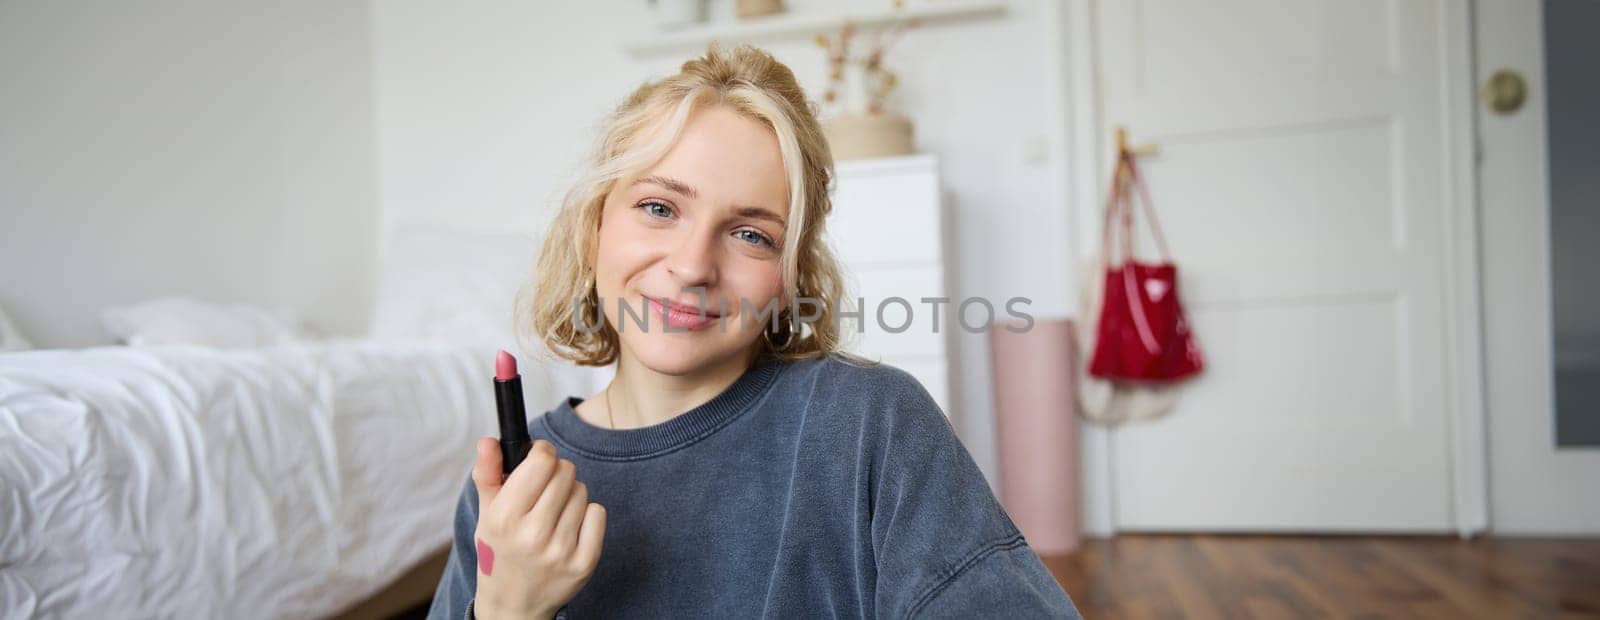 Portrait of young makeup artist, beauty blogger showing new lipstick, recording video in her room, smiling and expressing positivity.